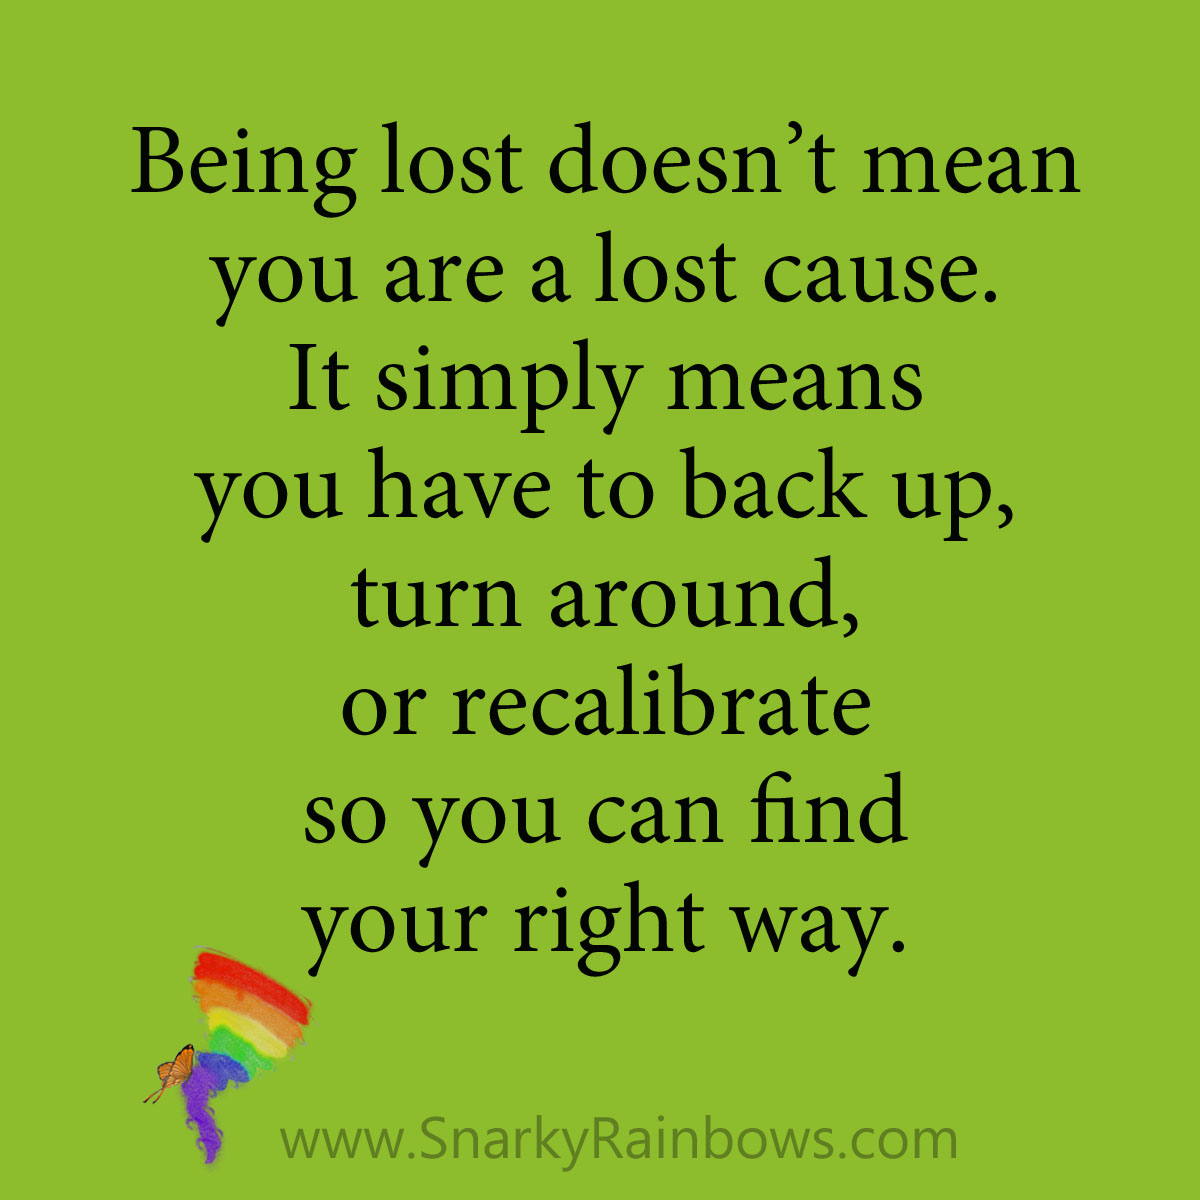 quote - not a lost cause